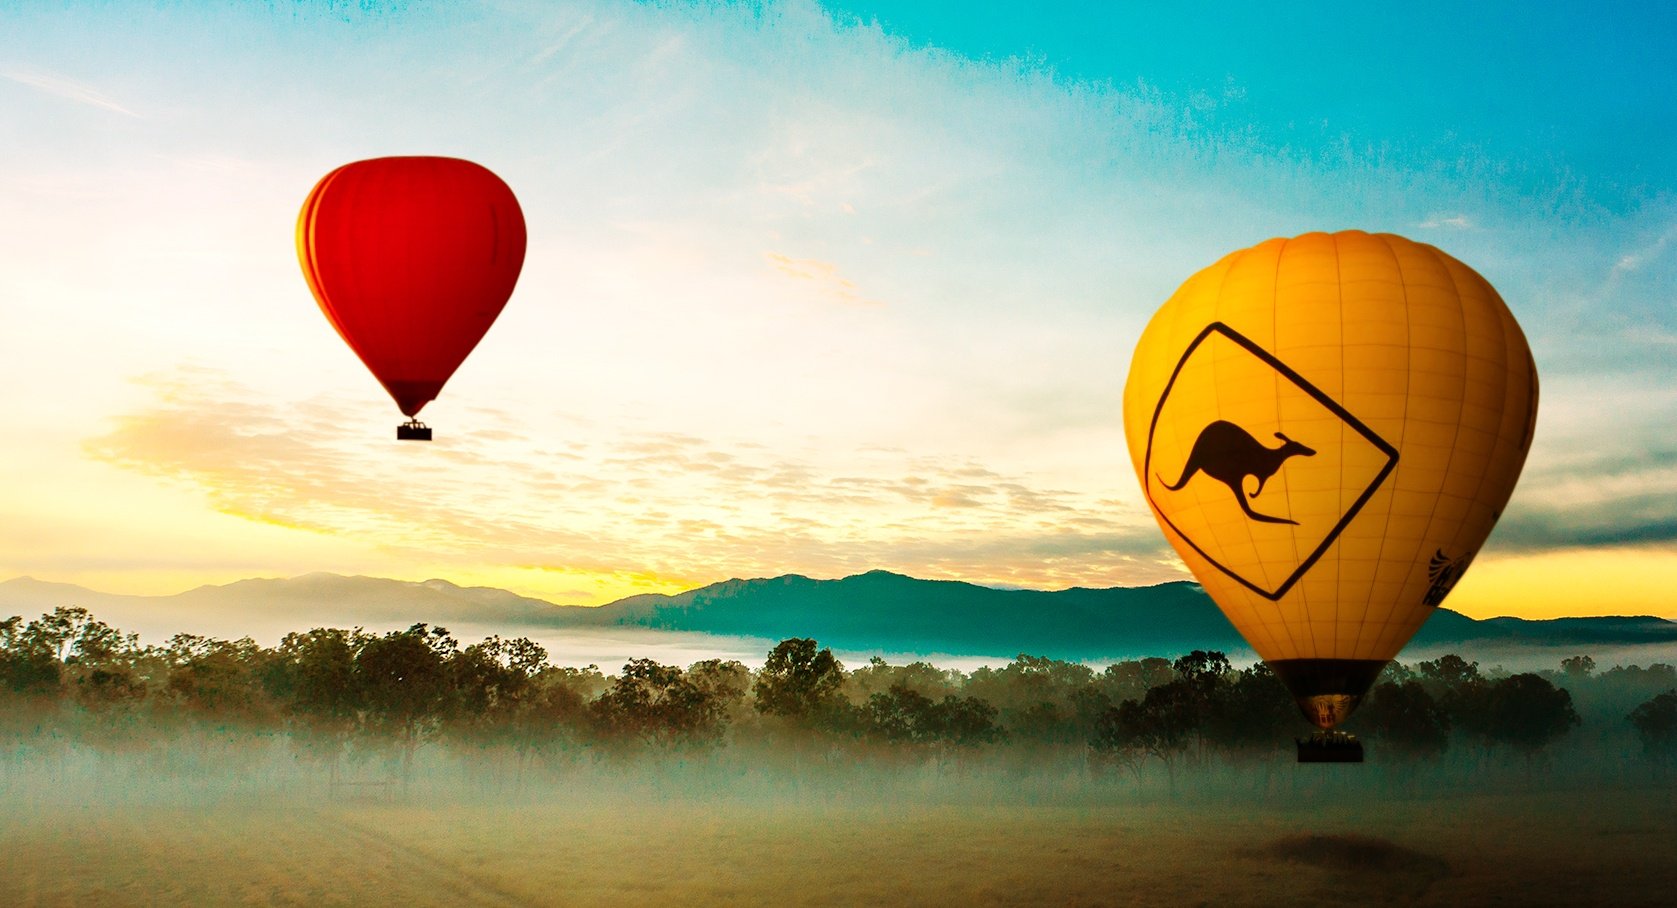 Gold Coast Luxury Hot Air Balloon experience for Two